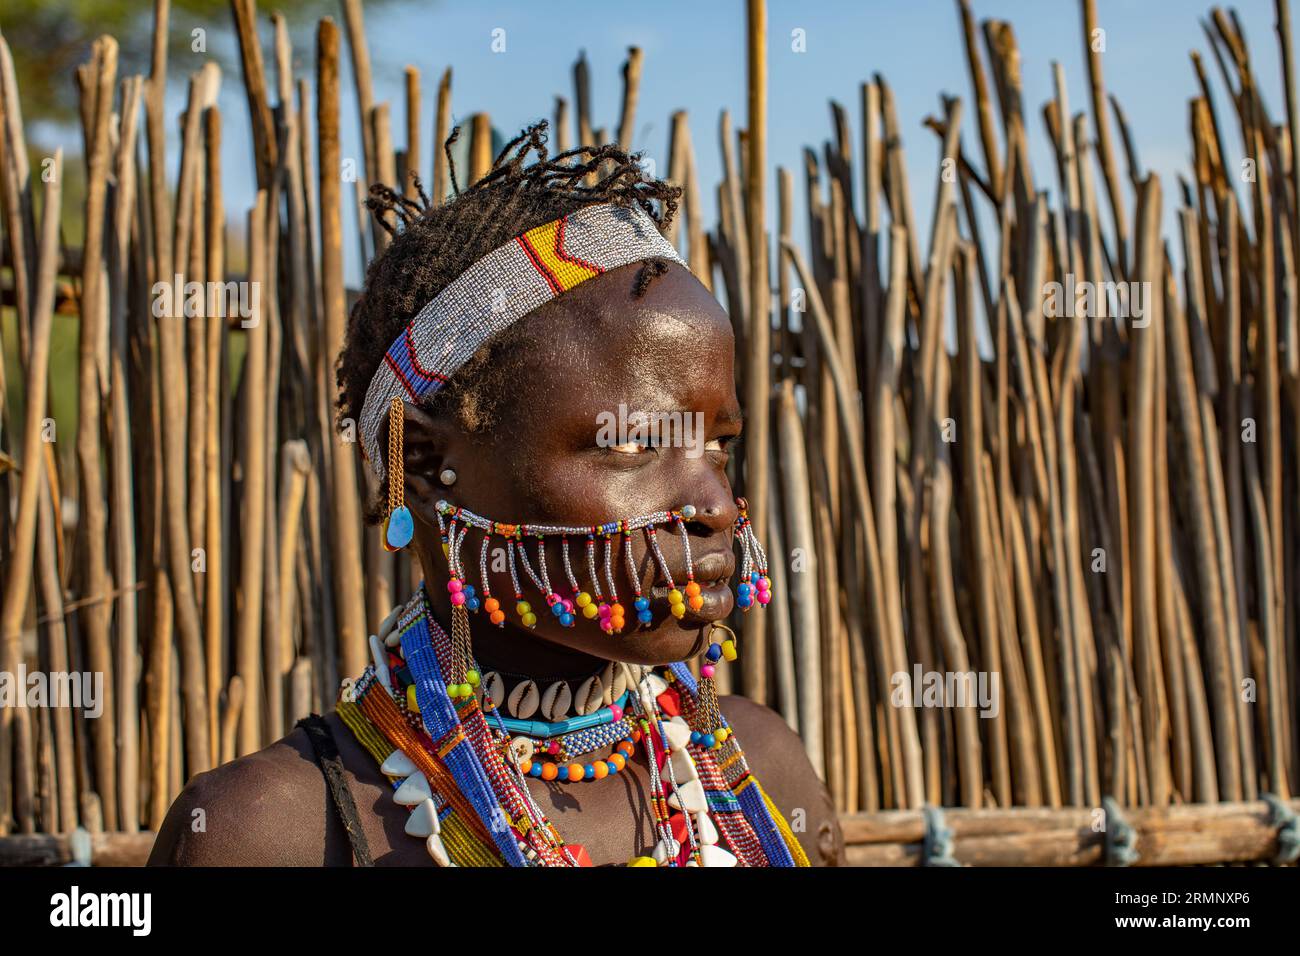 Woman from Larim tribe with decorations on her face Stock Photo